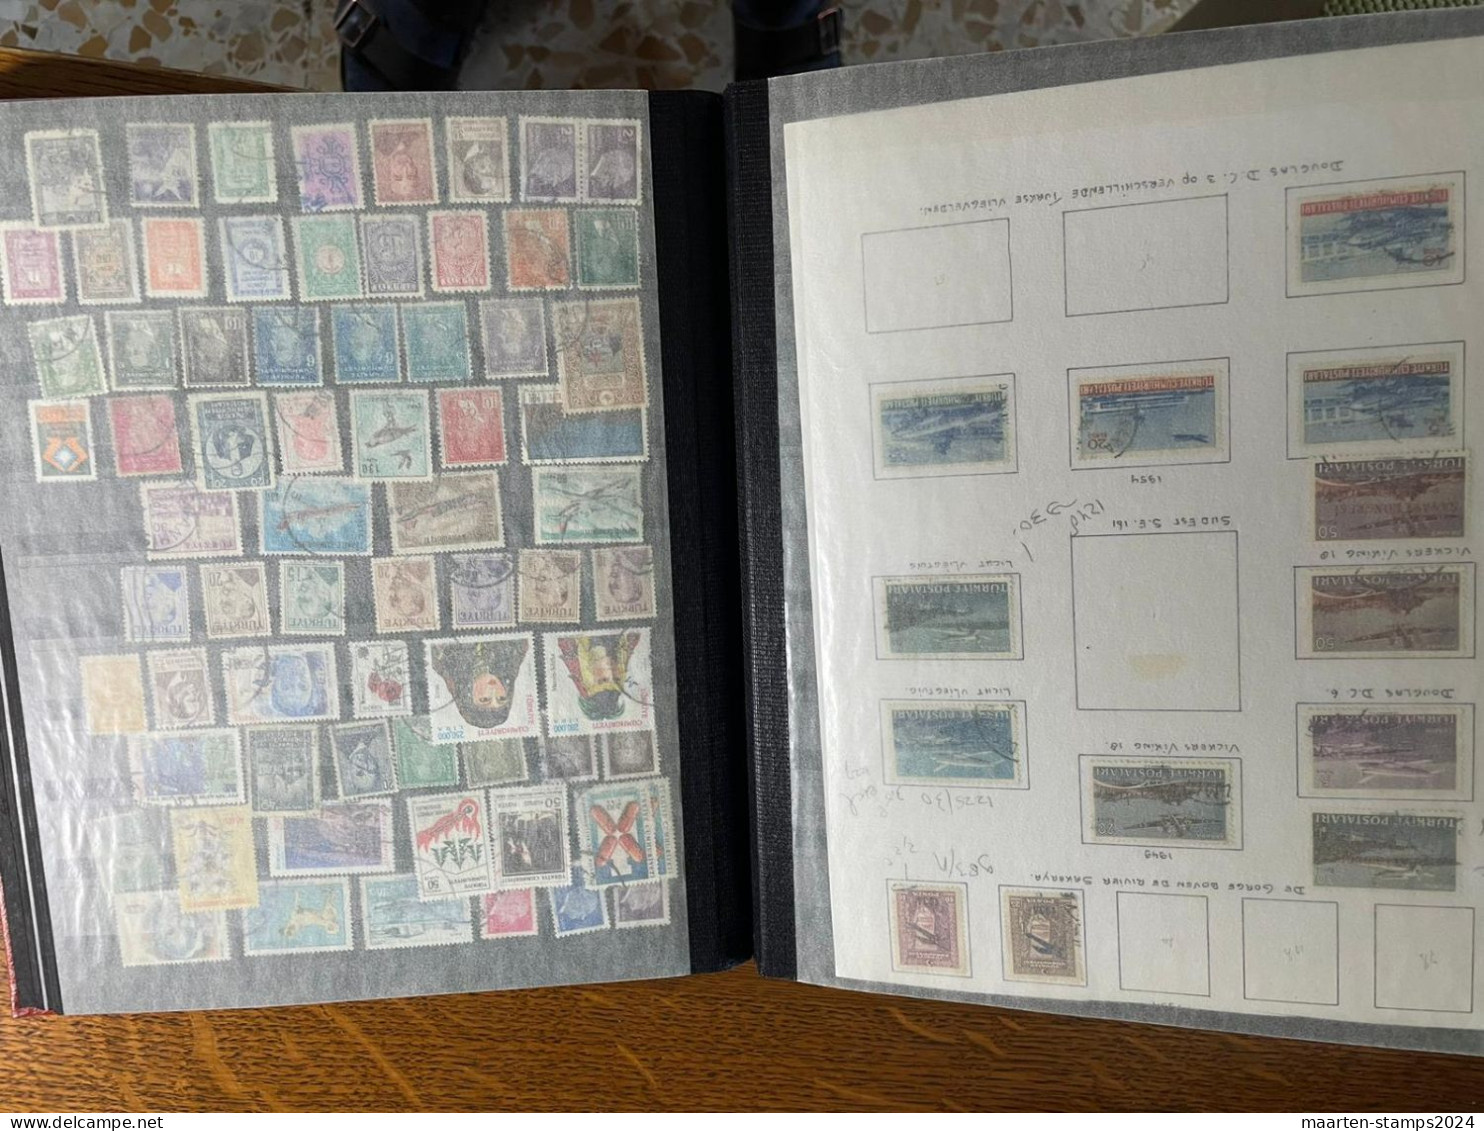 Collection Turkey classic to modern including Ottoman period before 1921 */**/o desired revenue min. 40 euro